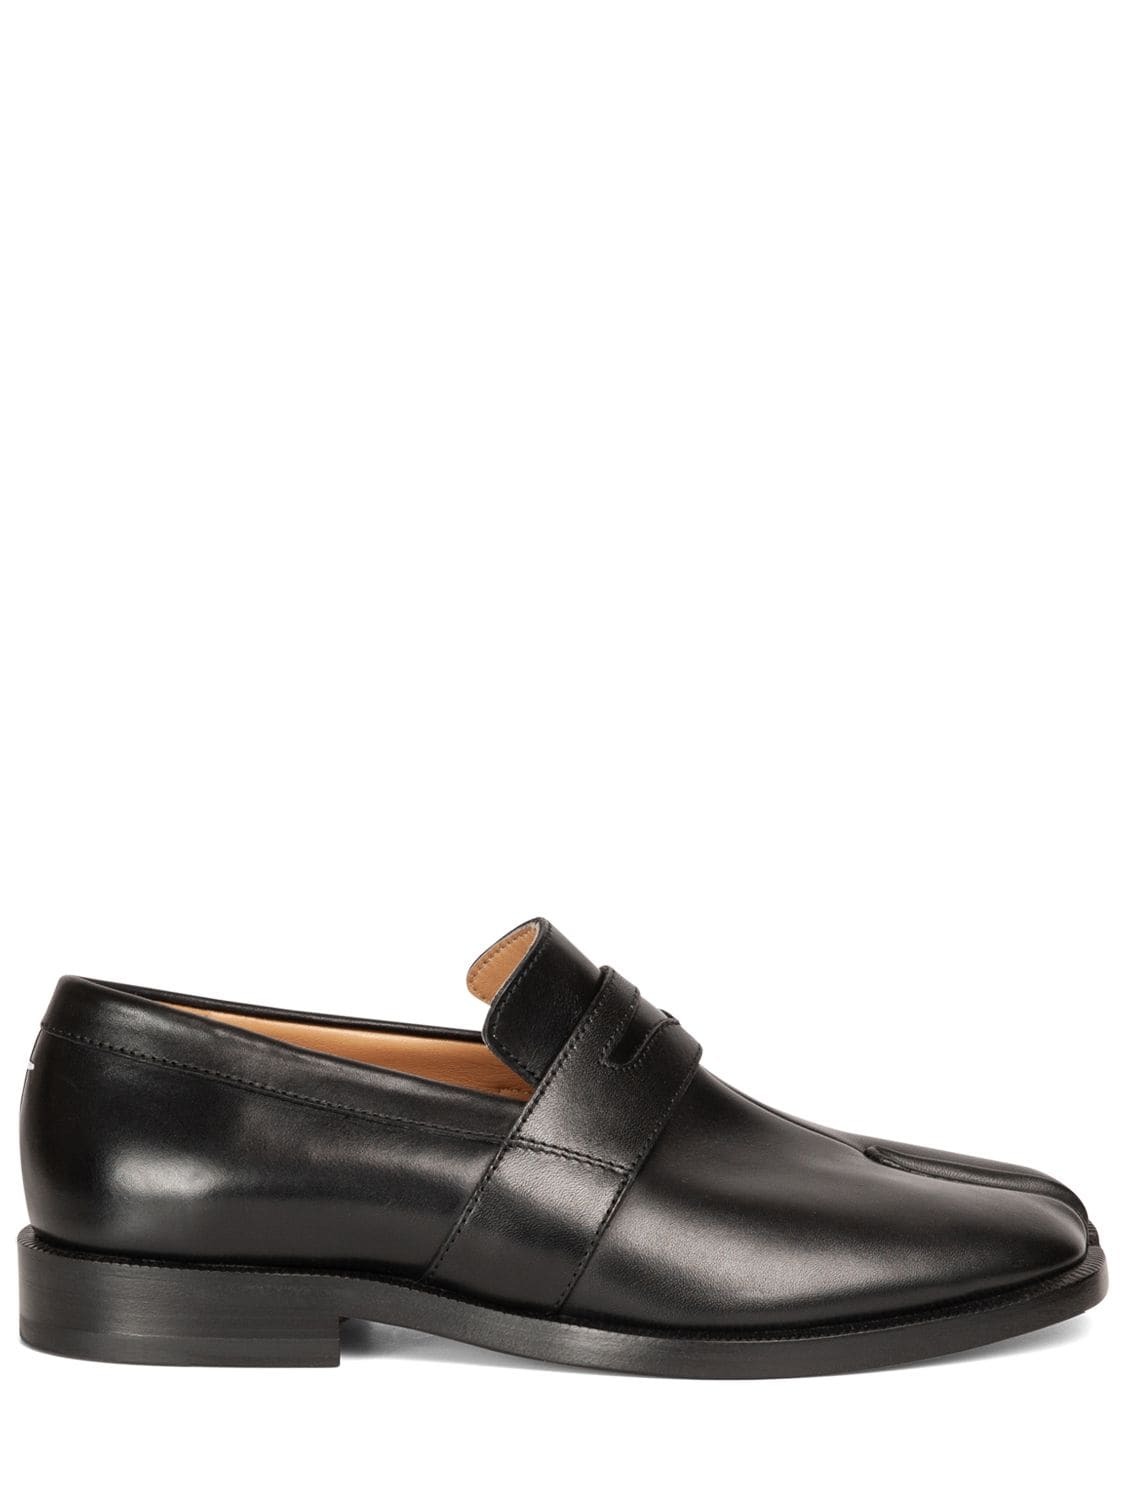 MAISON MARGIELA 20mm Tabi Brushed Leather Loafers in black